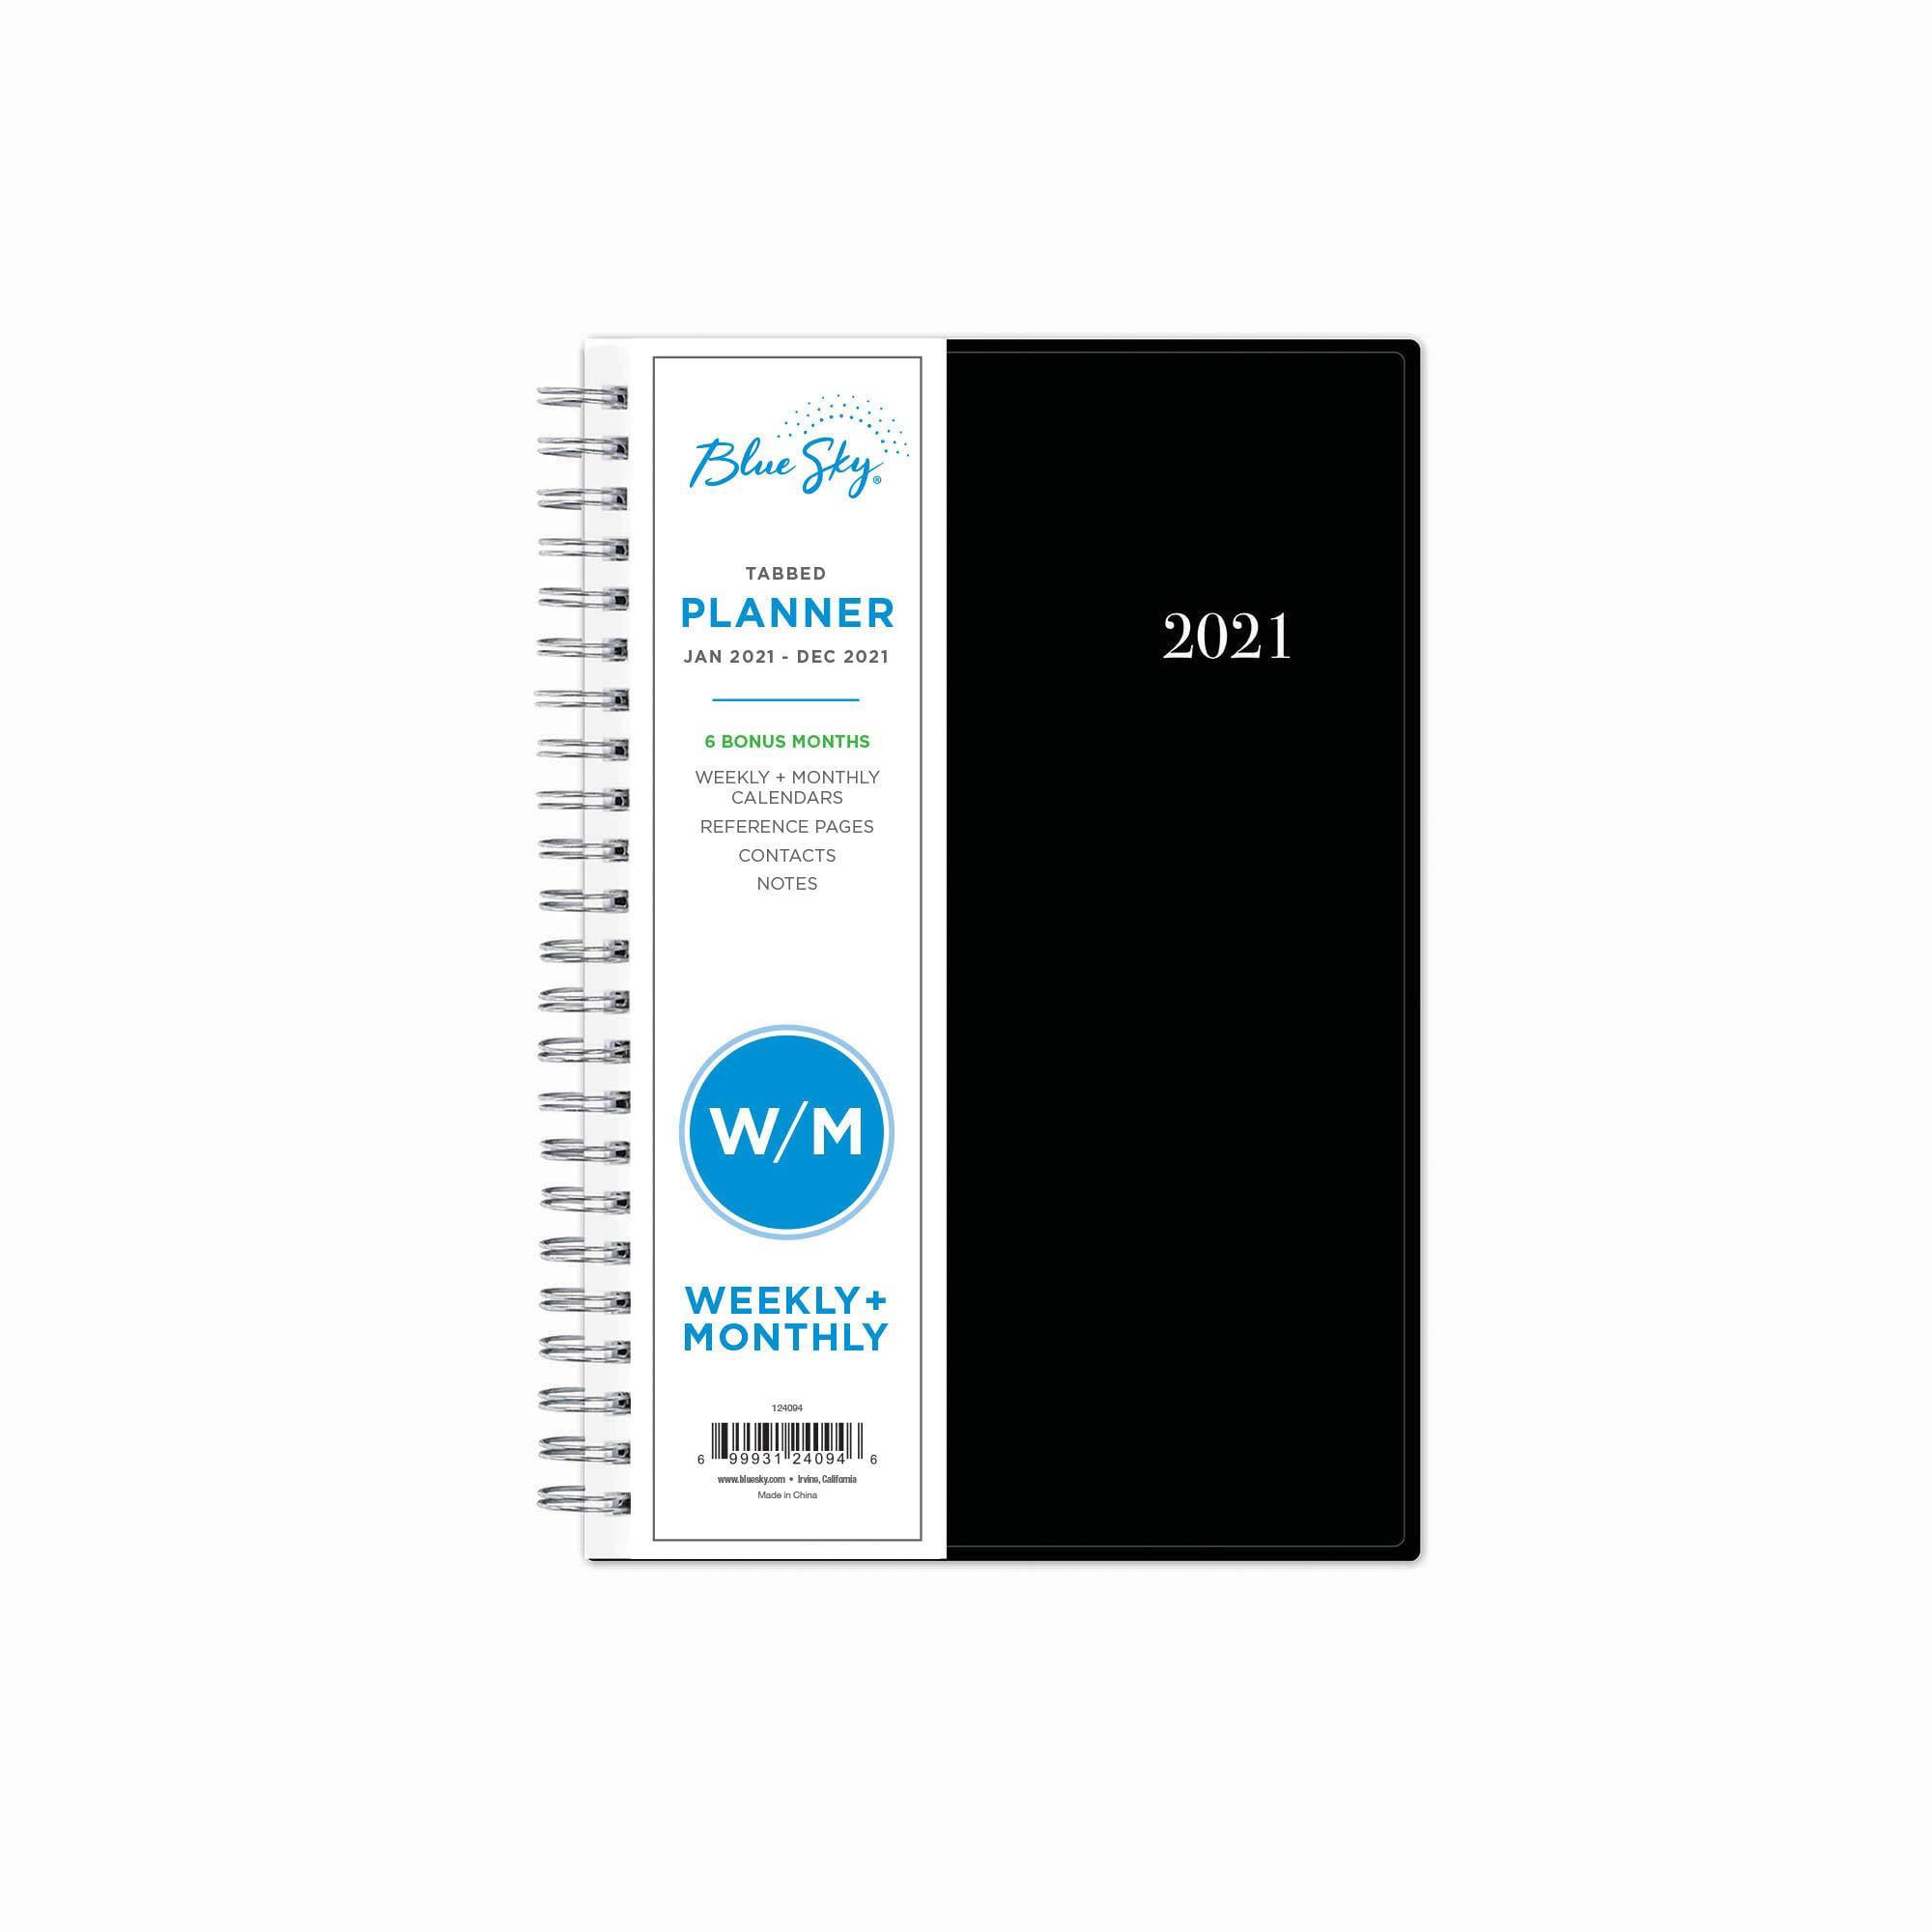 Flexible Cover Blue Sky 2021 Weekly & Monthly Planner Twin-Wire Binding Standard-1 Pack 124093 Enterprise 8.5 x 11 